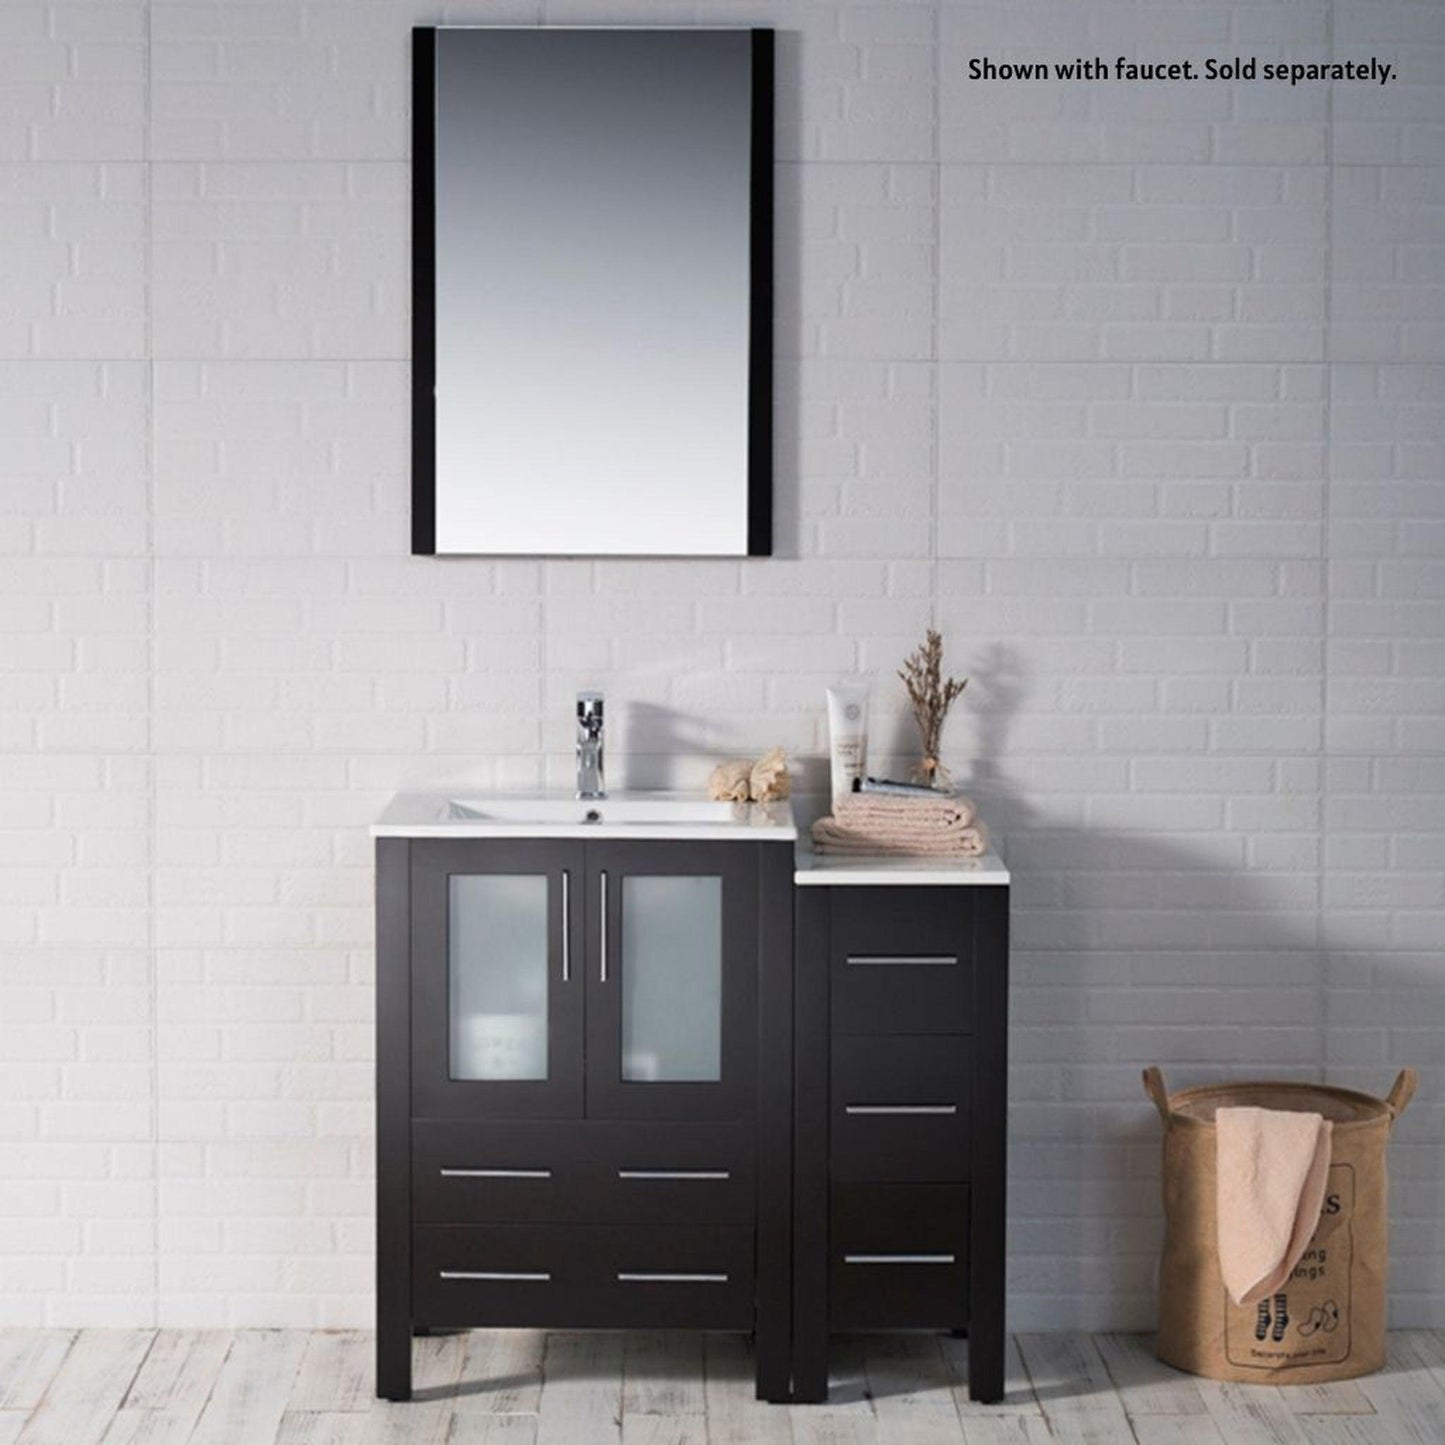 Blossom Sydney 36" Espresso Freestanding Vanity Set With Integrated Single Sink Ceramic Top, Mirror and Side Cabinet